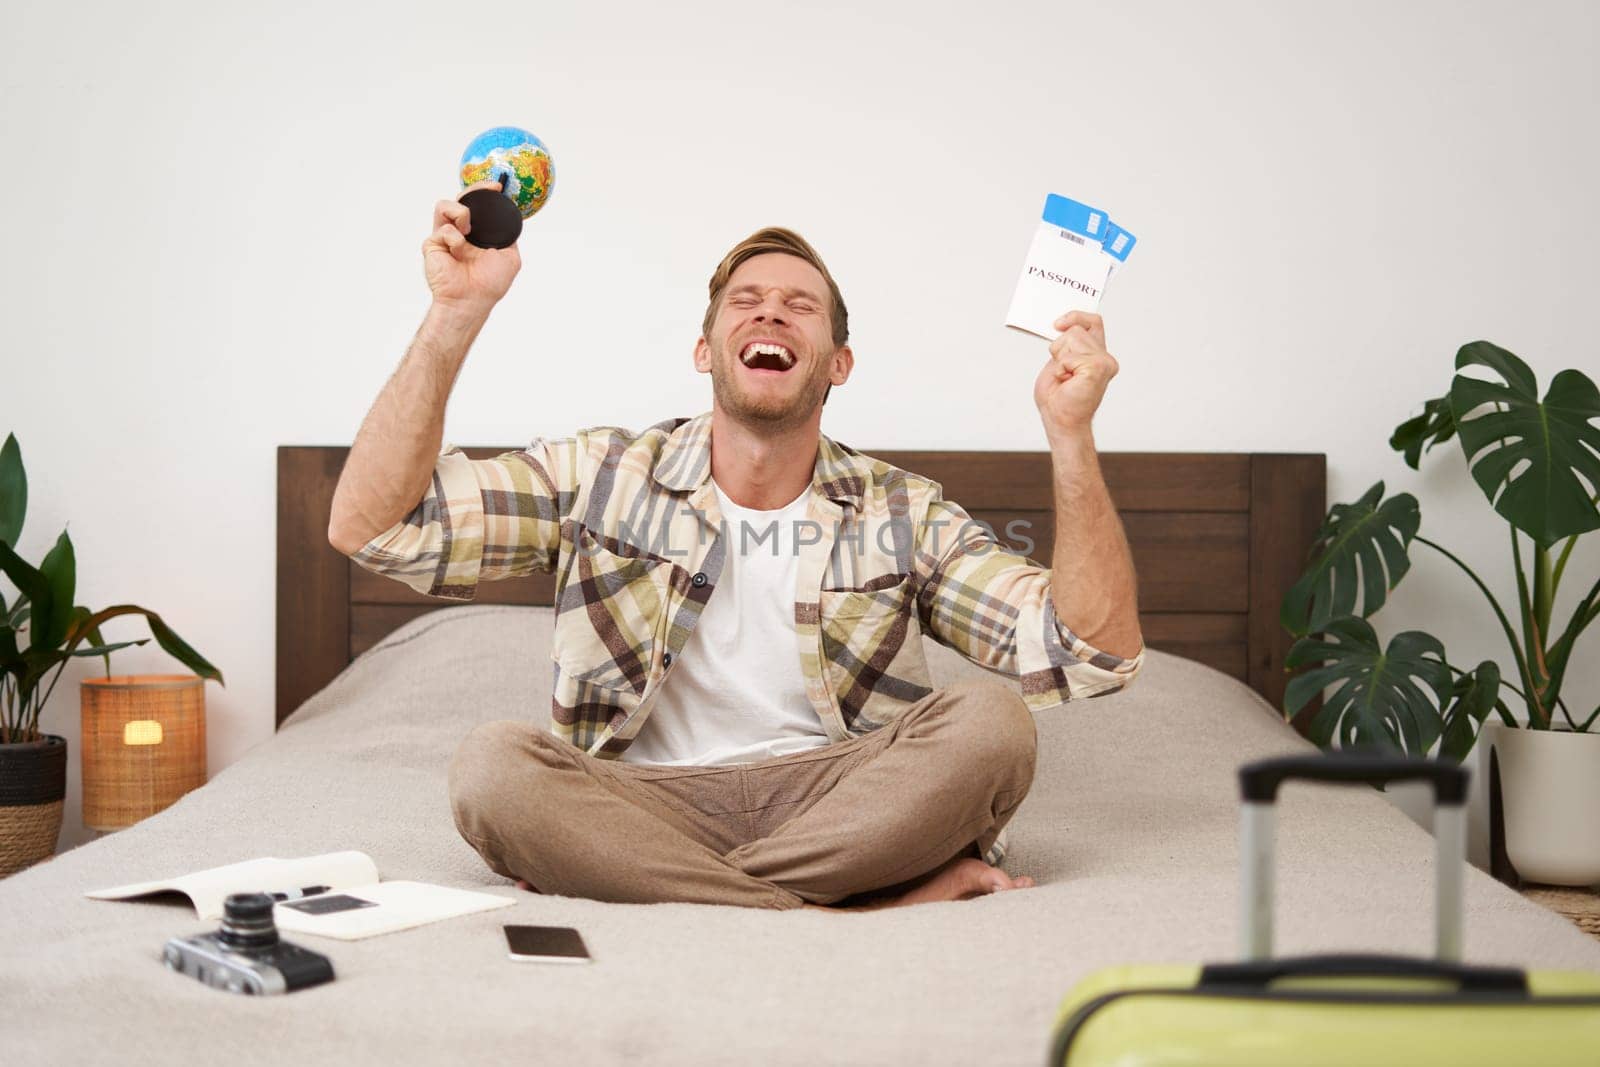 Portrait of happy guy, tourist goes on vacation abroad, holds globe and plane ticket, excited about his holiday, sits on bed with smiling, enthusiastic face expression. Copy space